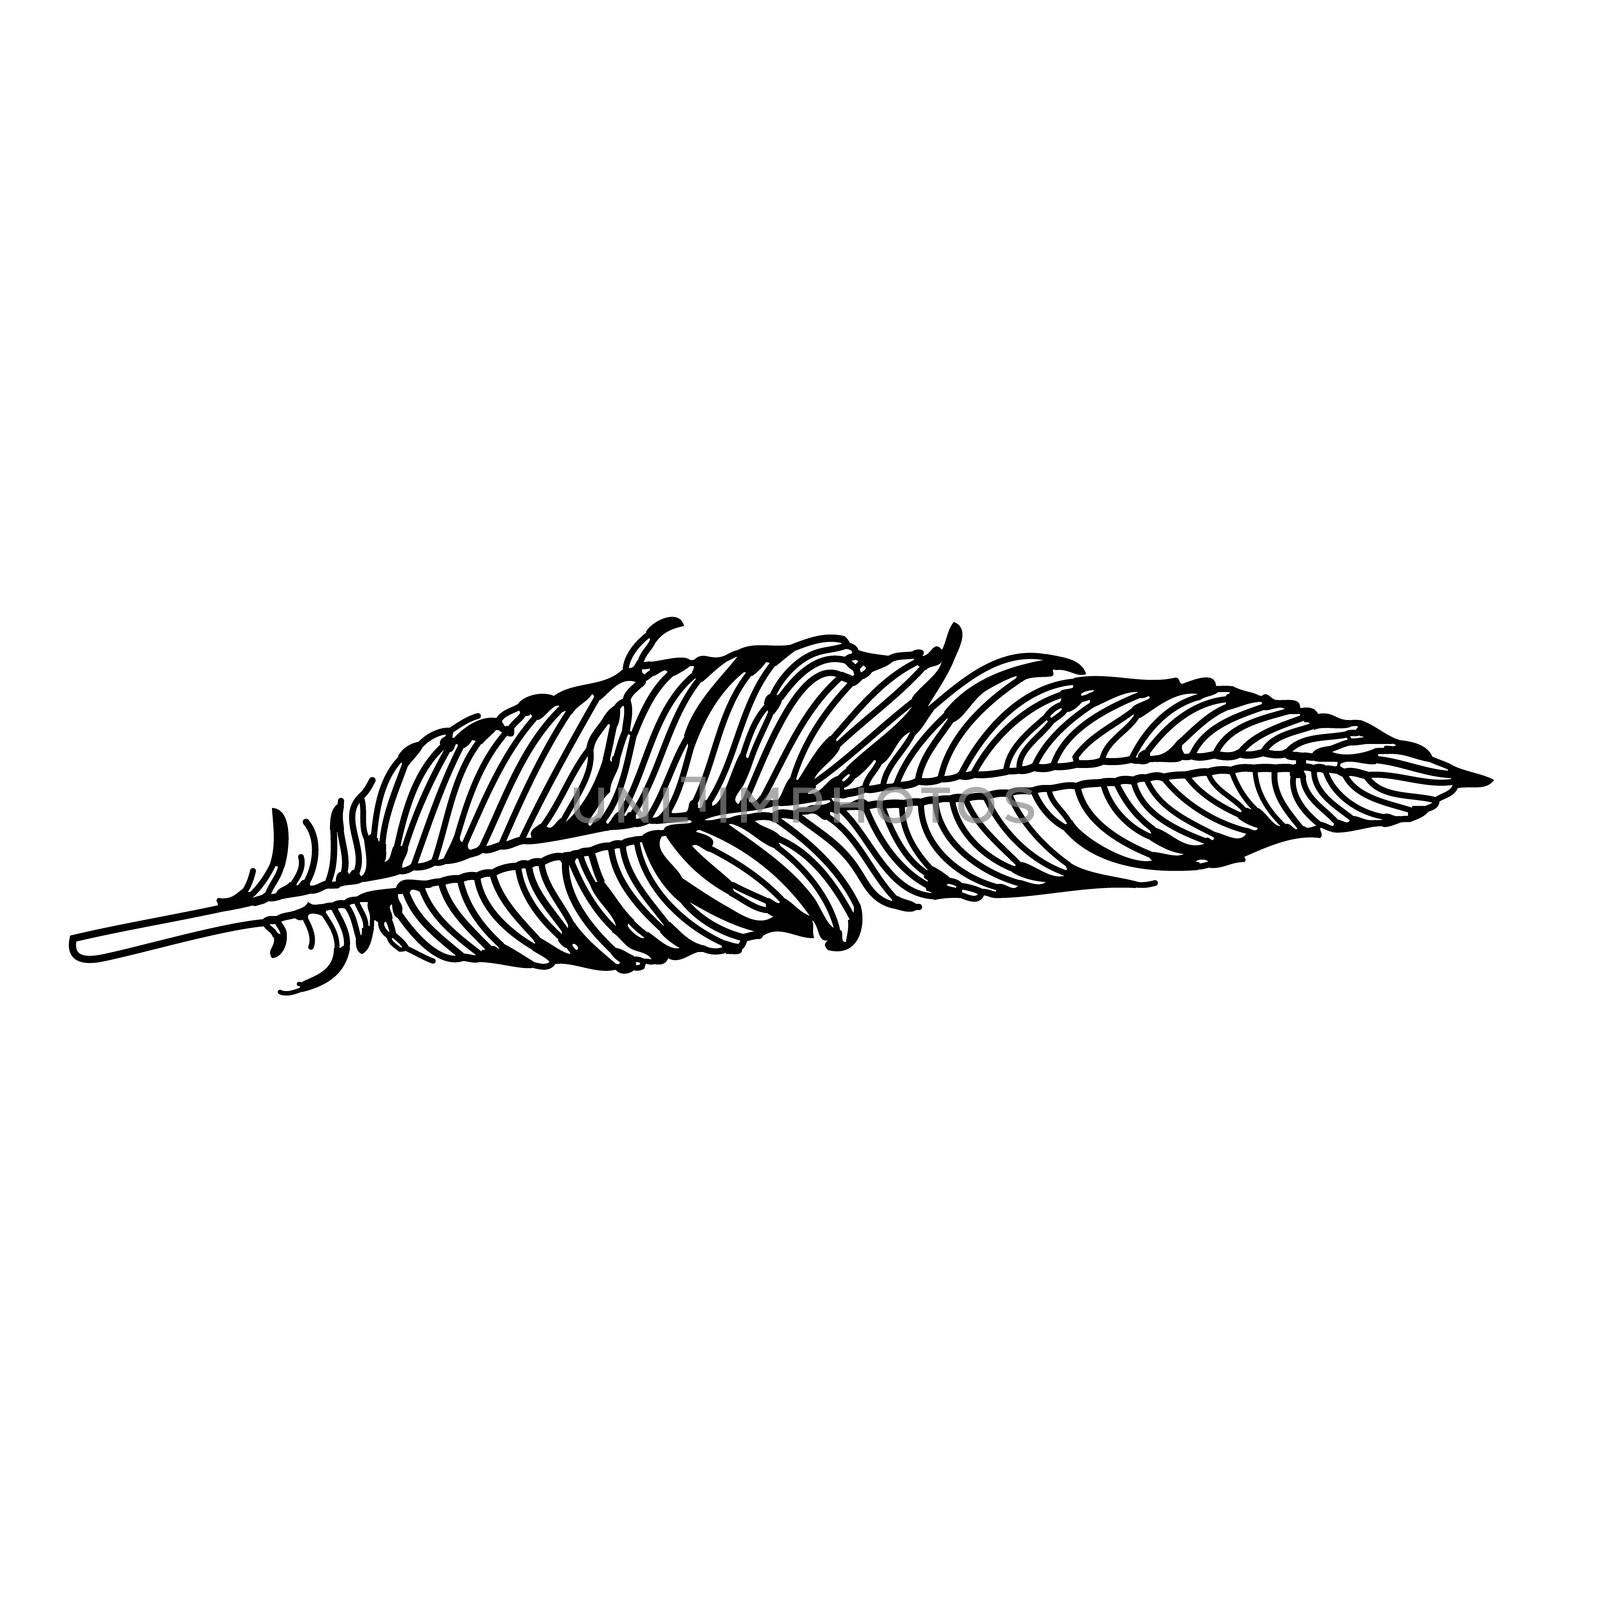 freehand sketch illustration of feather of bird doodle hand drawn